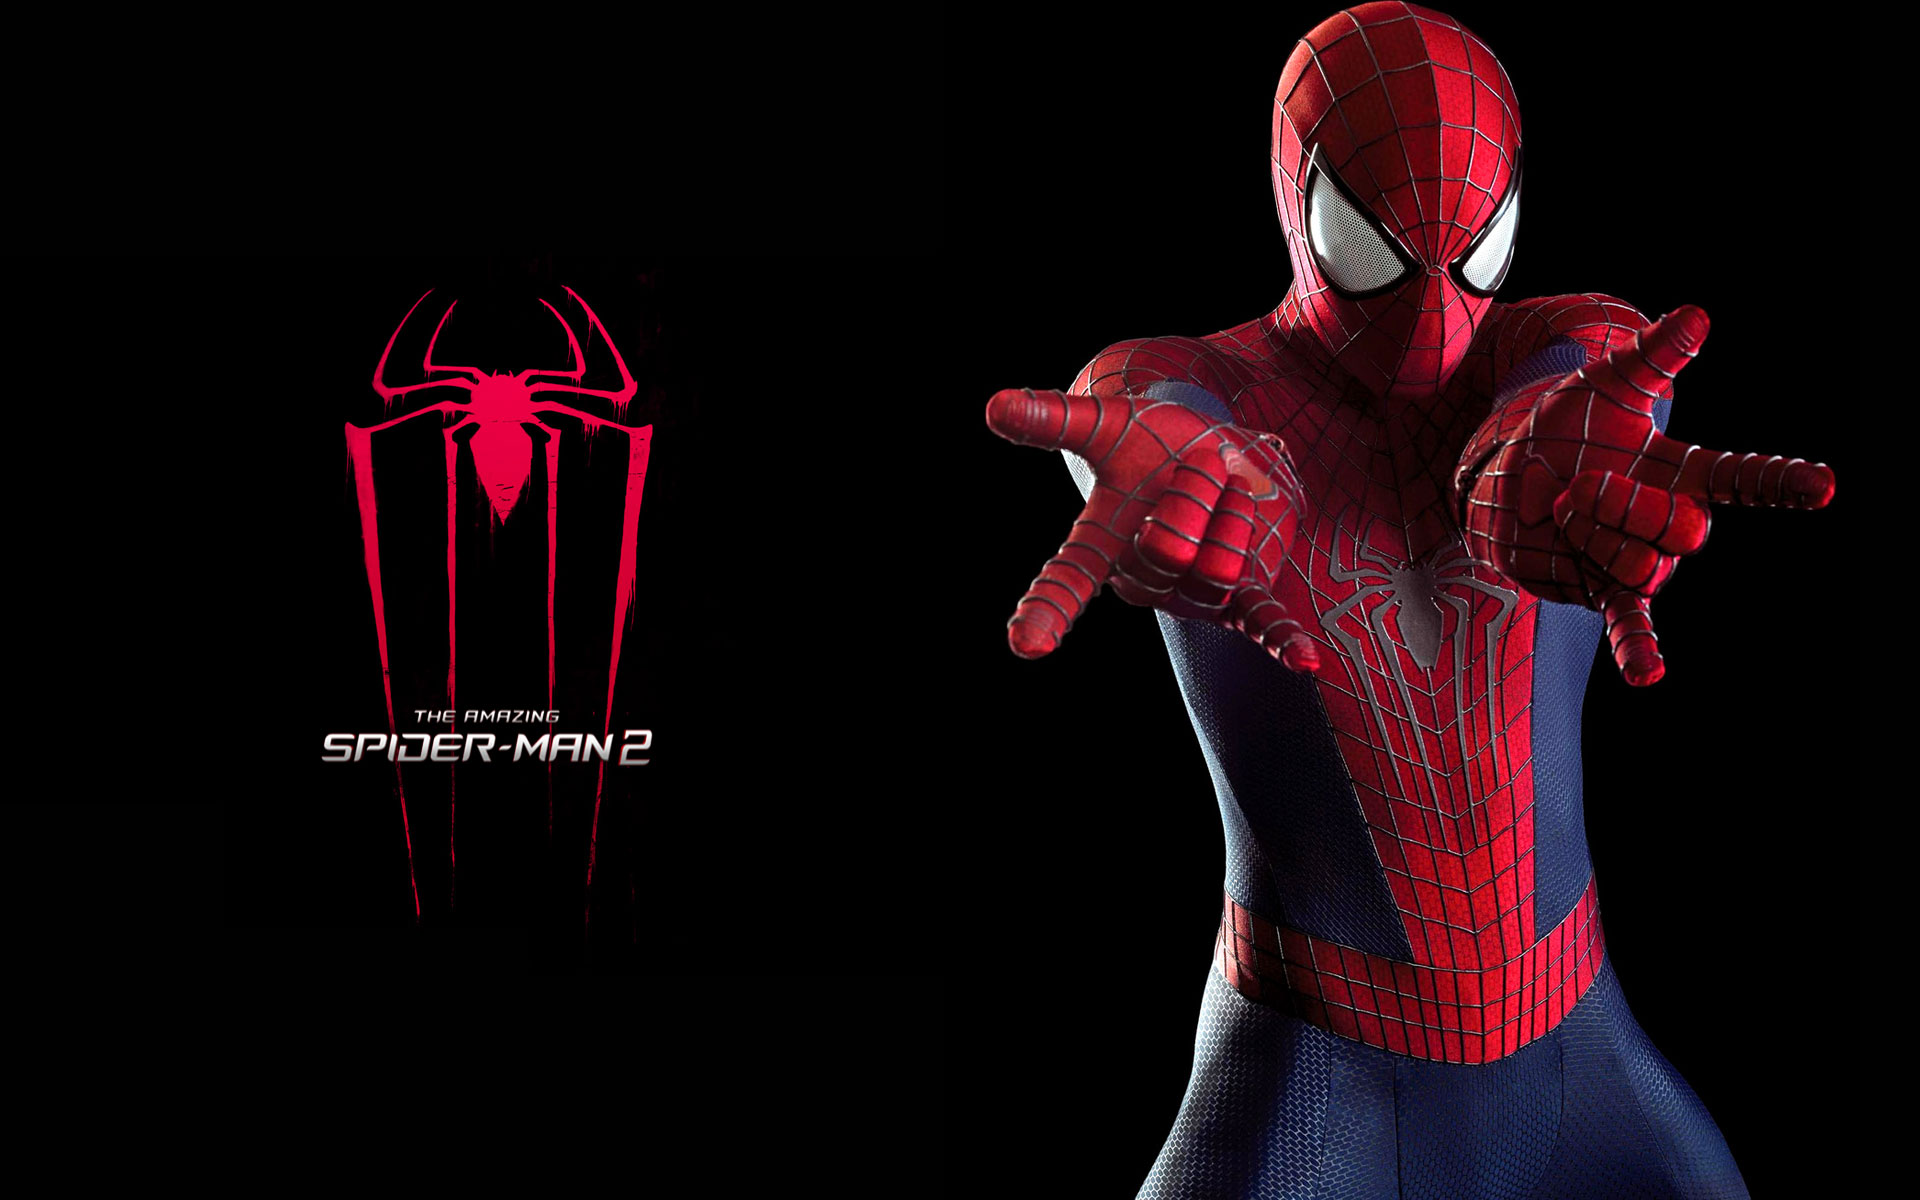 Px Awesome Hq Definition Backgrounds Of Spider Man, - Amazing Spider Man 2 Spiderman - HD Wallpaper 